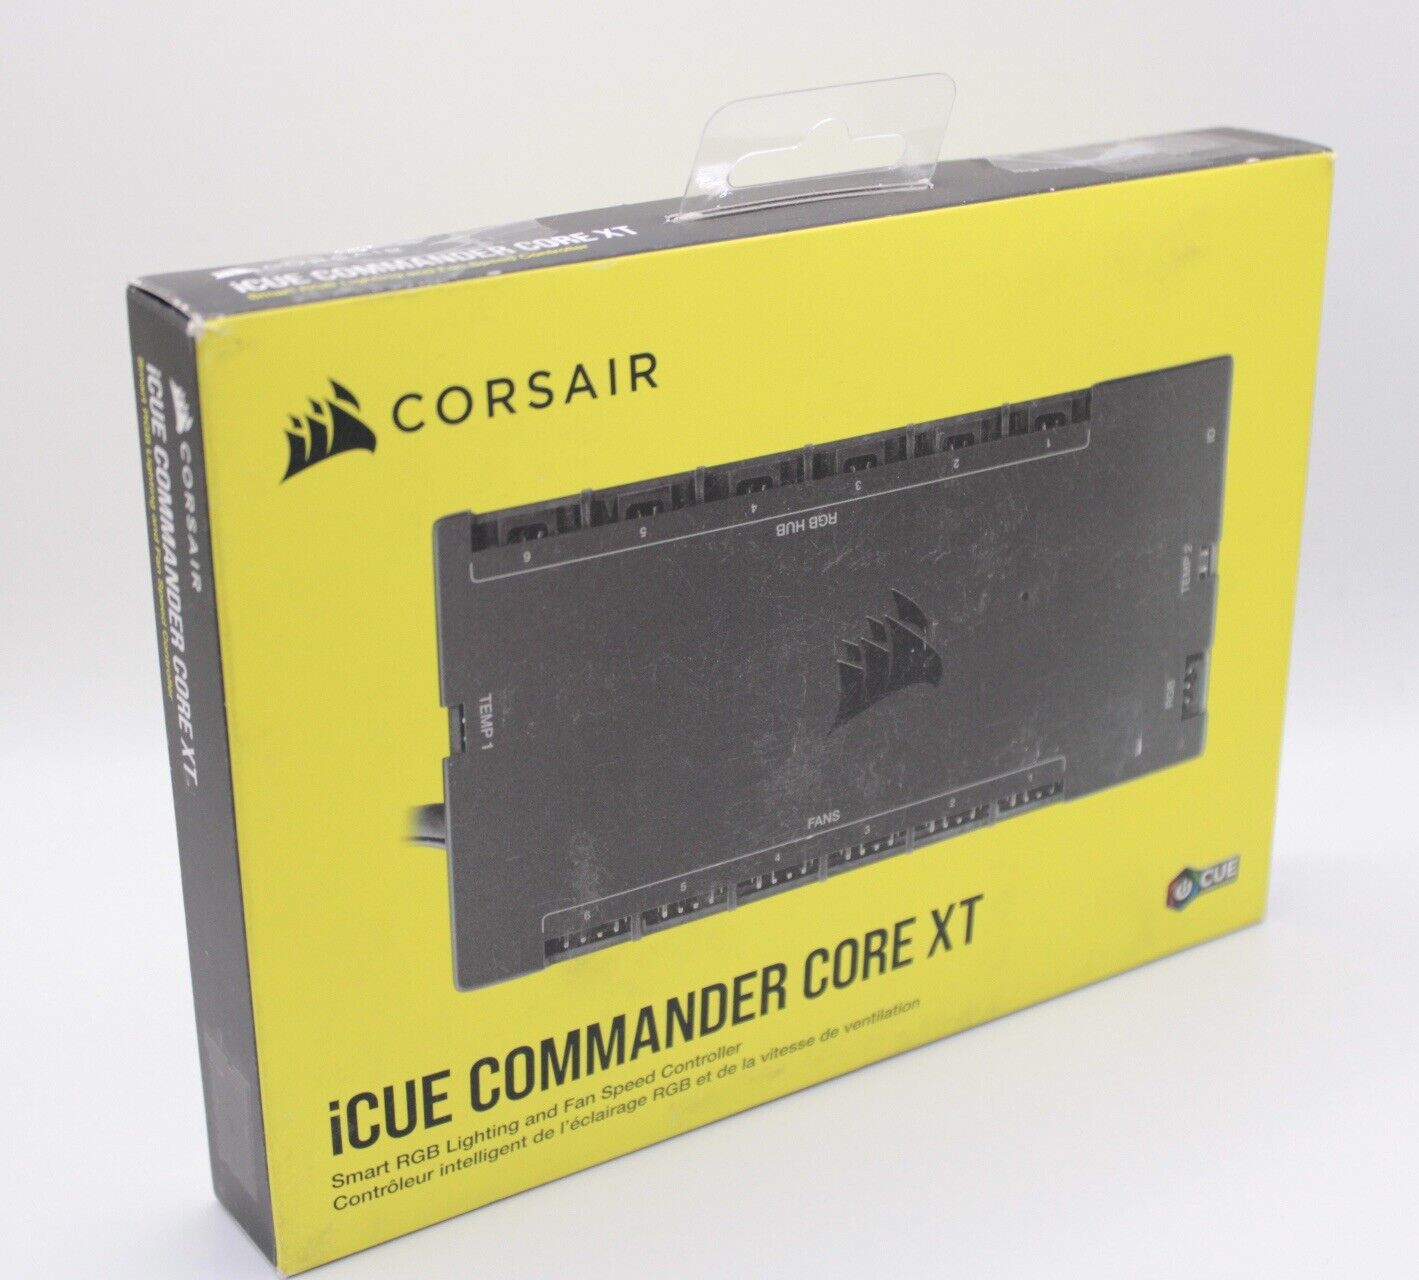 CORSAIR iCUE COMMANDER CORE XT Smart RGB Lighting and Fan Speed Controller